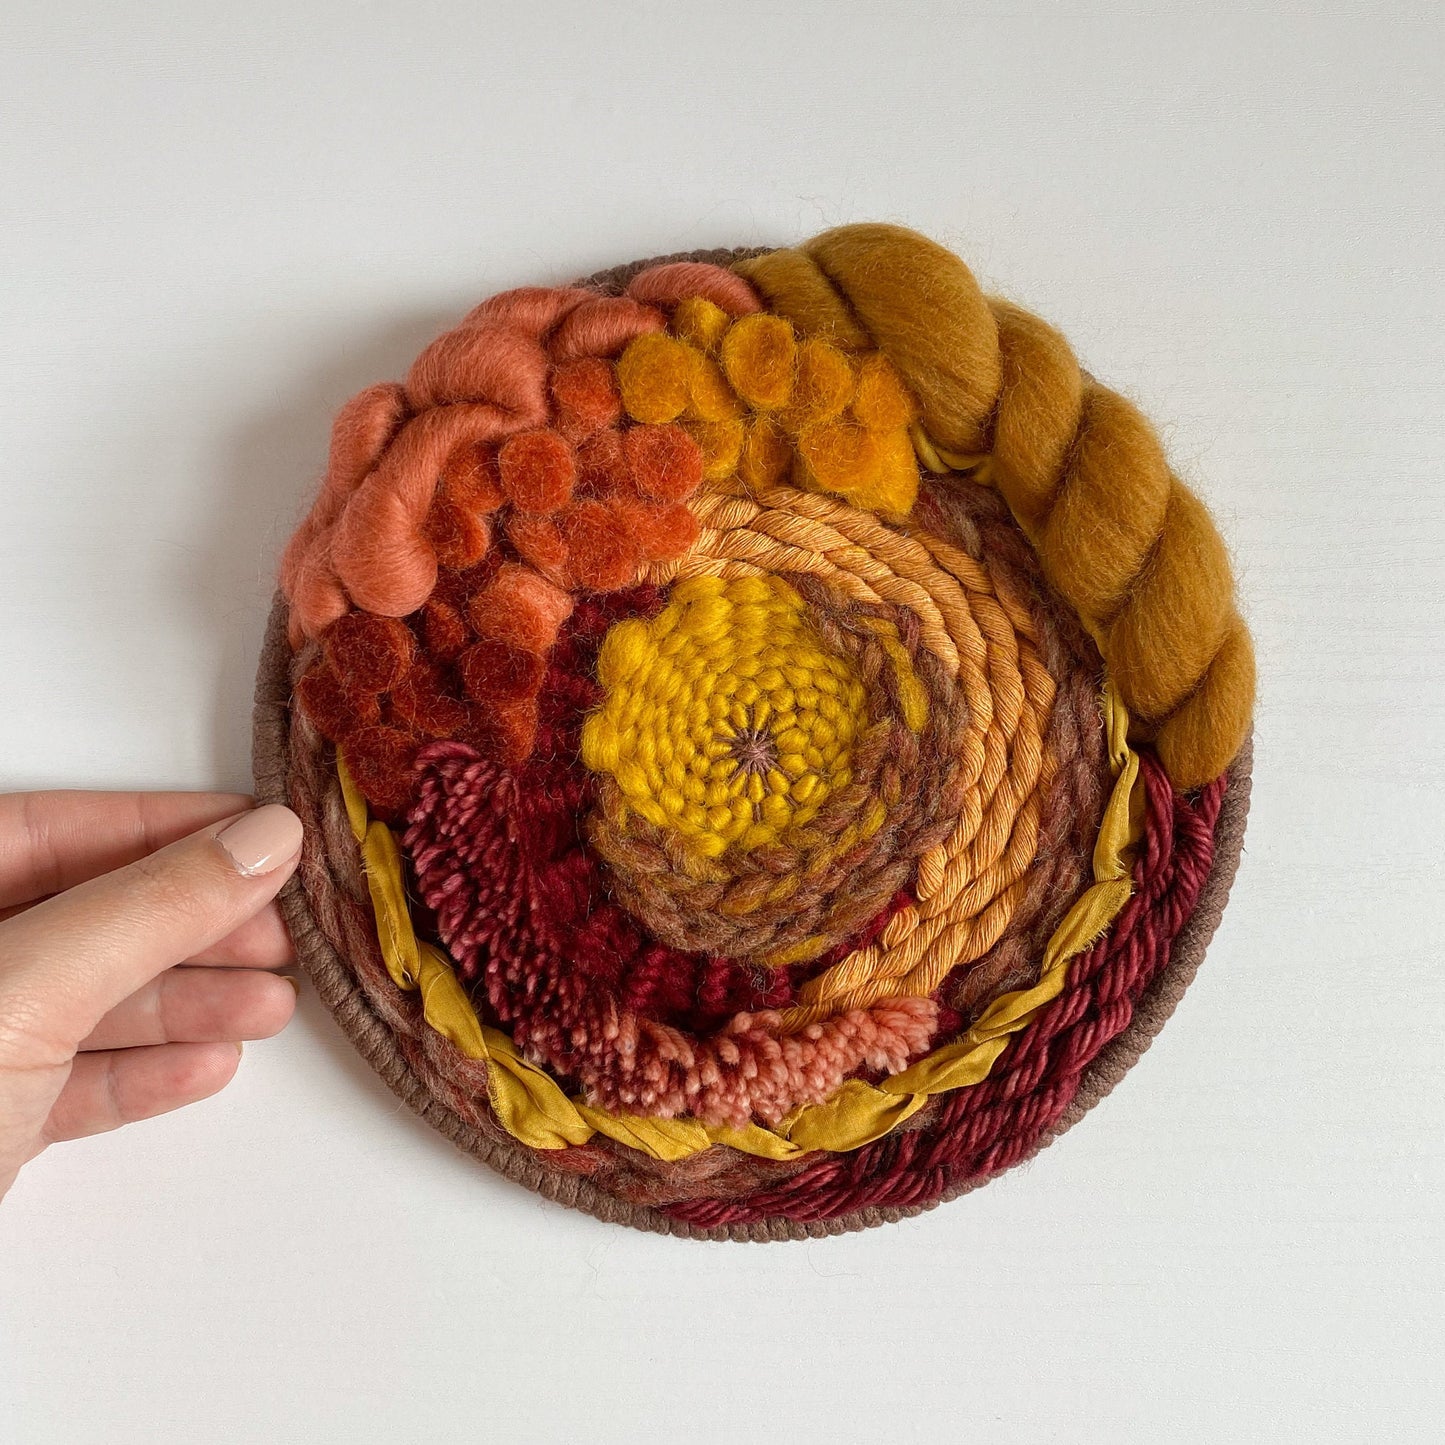 Autumn Afternoon - Woven Wall Hanging